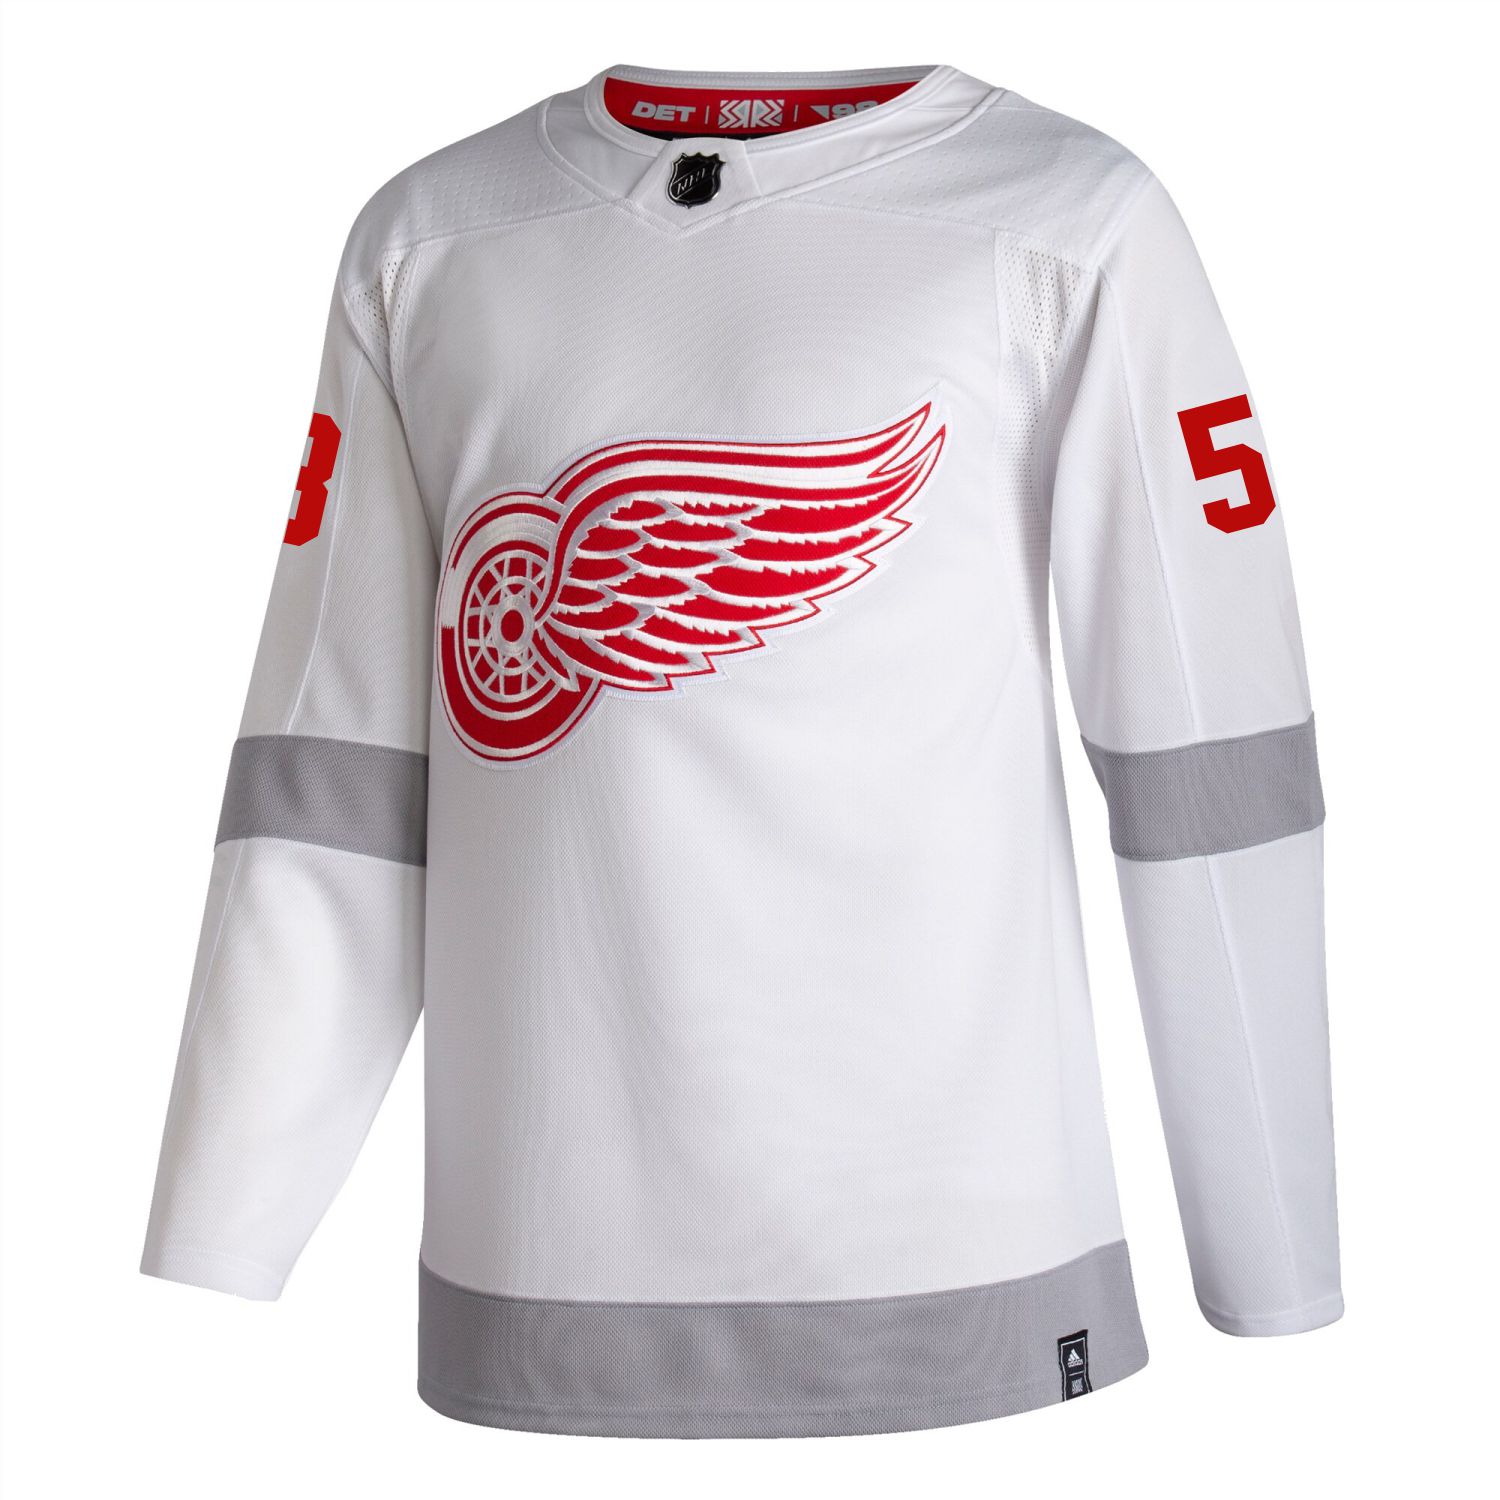 Moritz Seider #53 Detroit Red Wings Adidas Reverse Retro Jersey by Vintage Detroit Collection